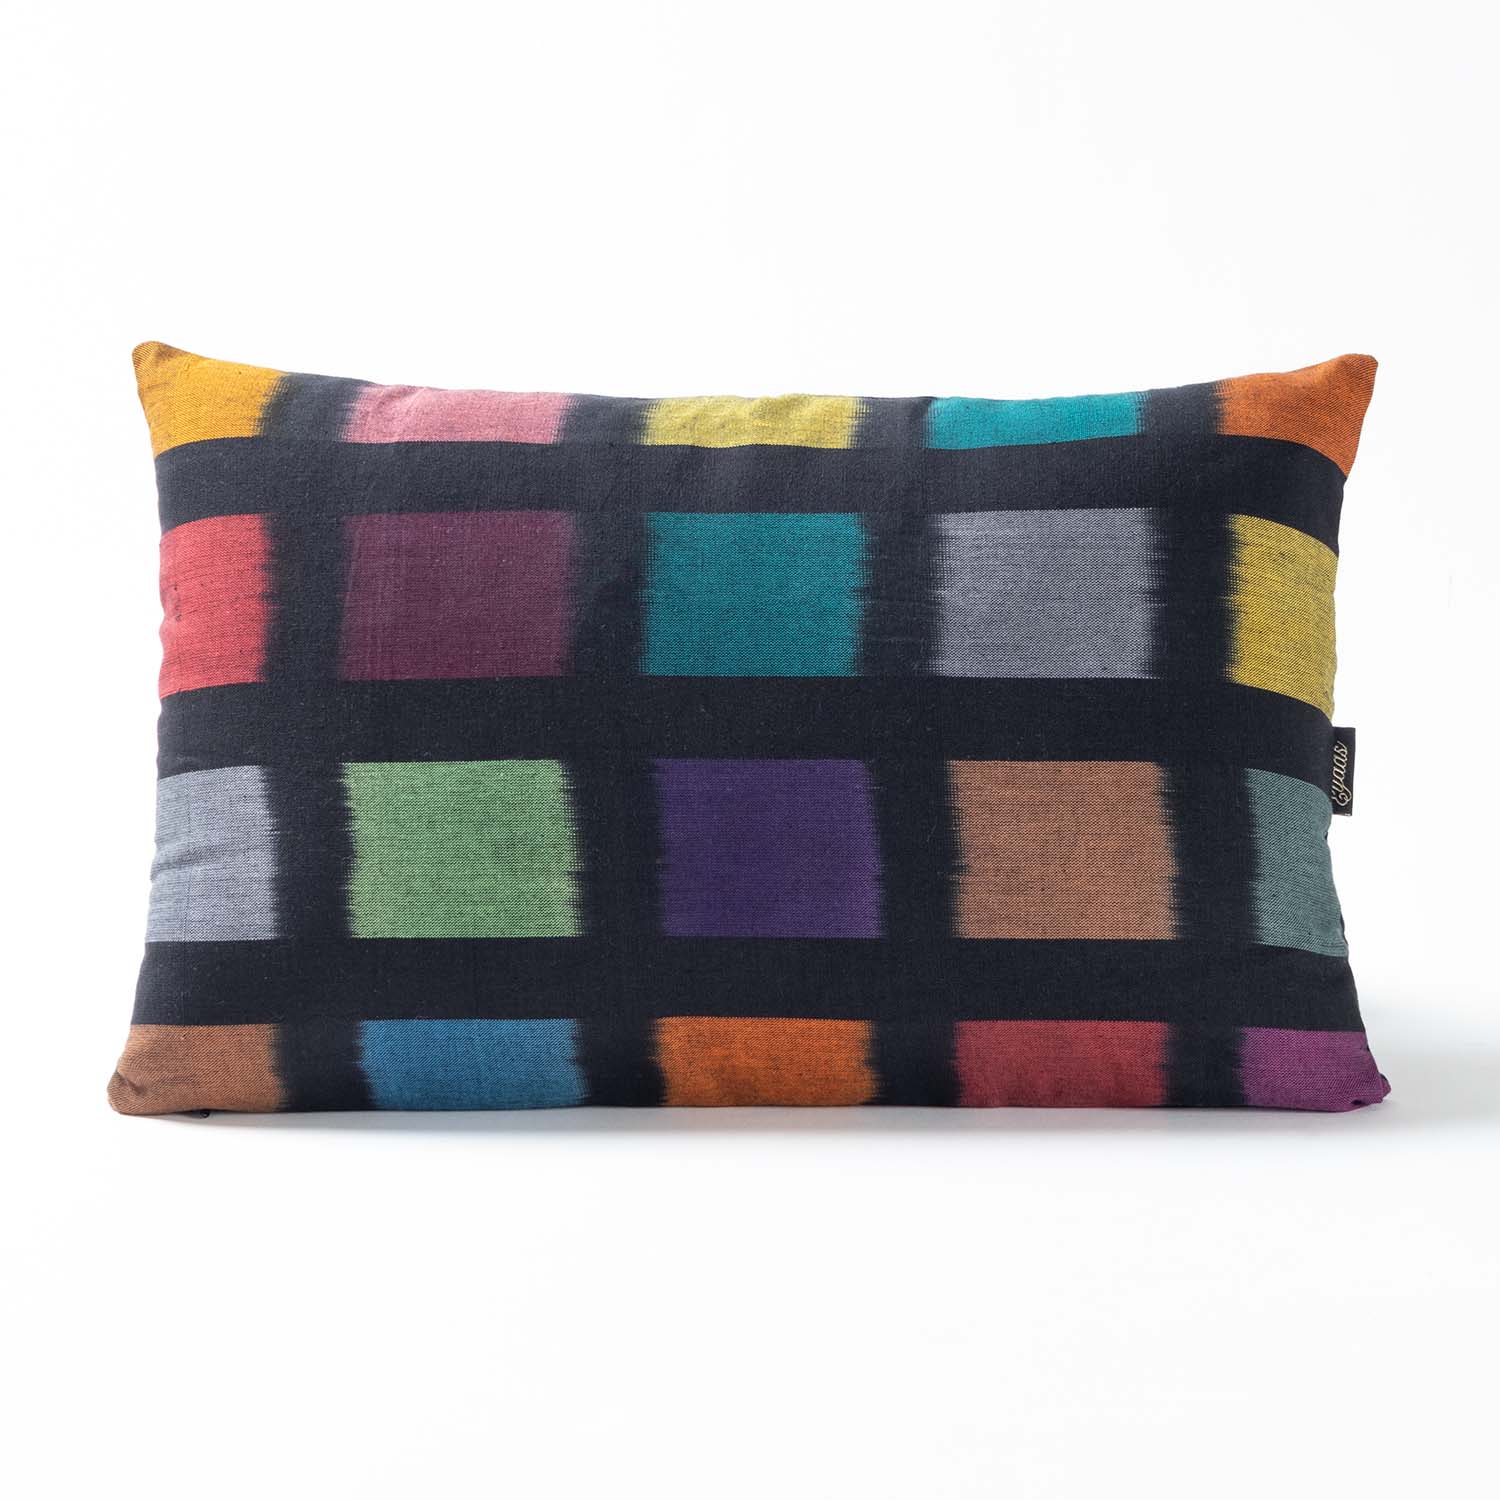 Handwoven Ikat Cushion Cover Set of 2